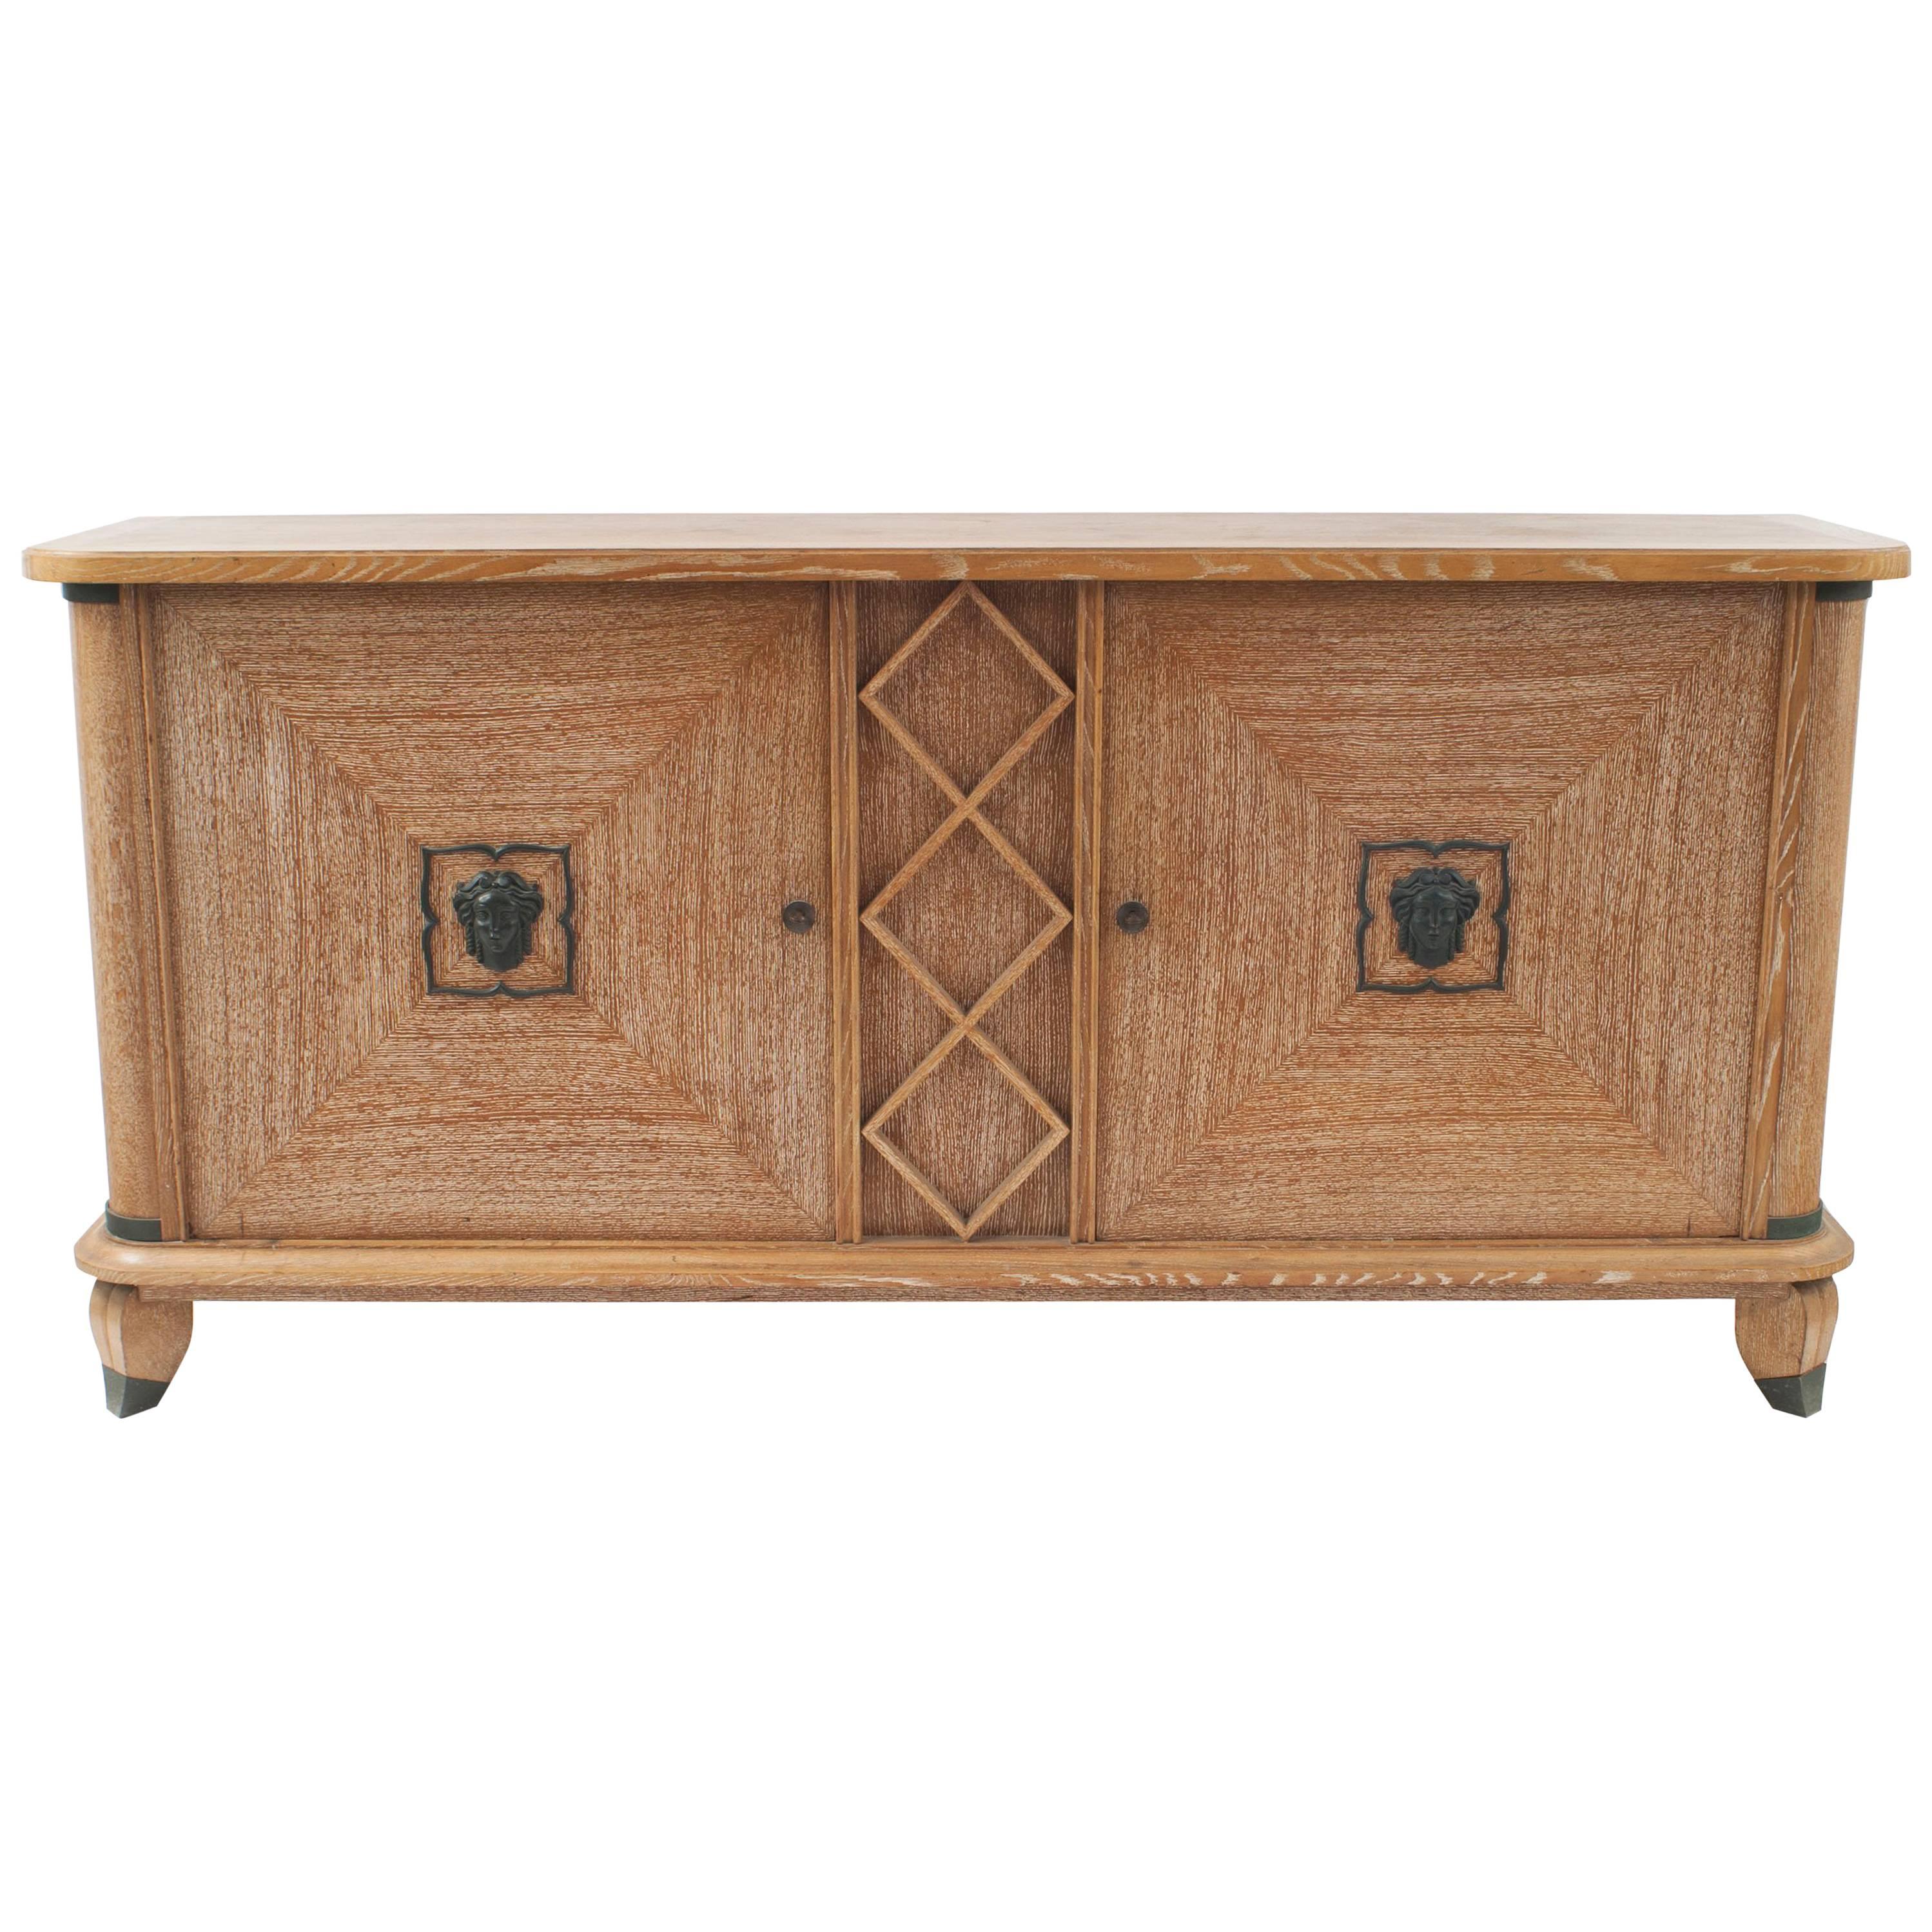 French 1940s Cerused Oak Buffet, Attrib. to Andre Arbus